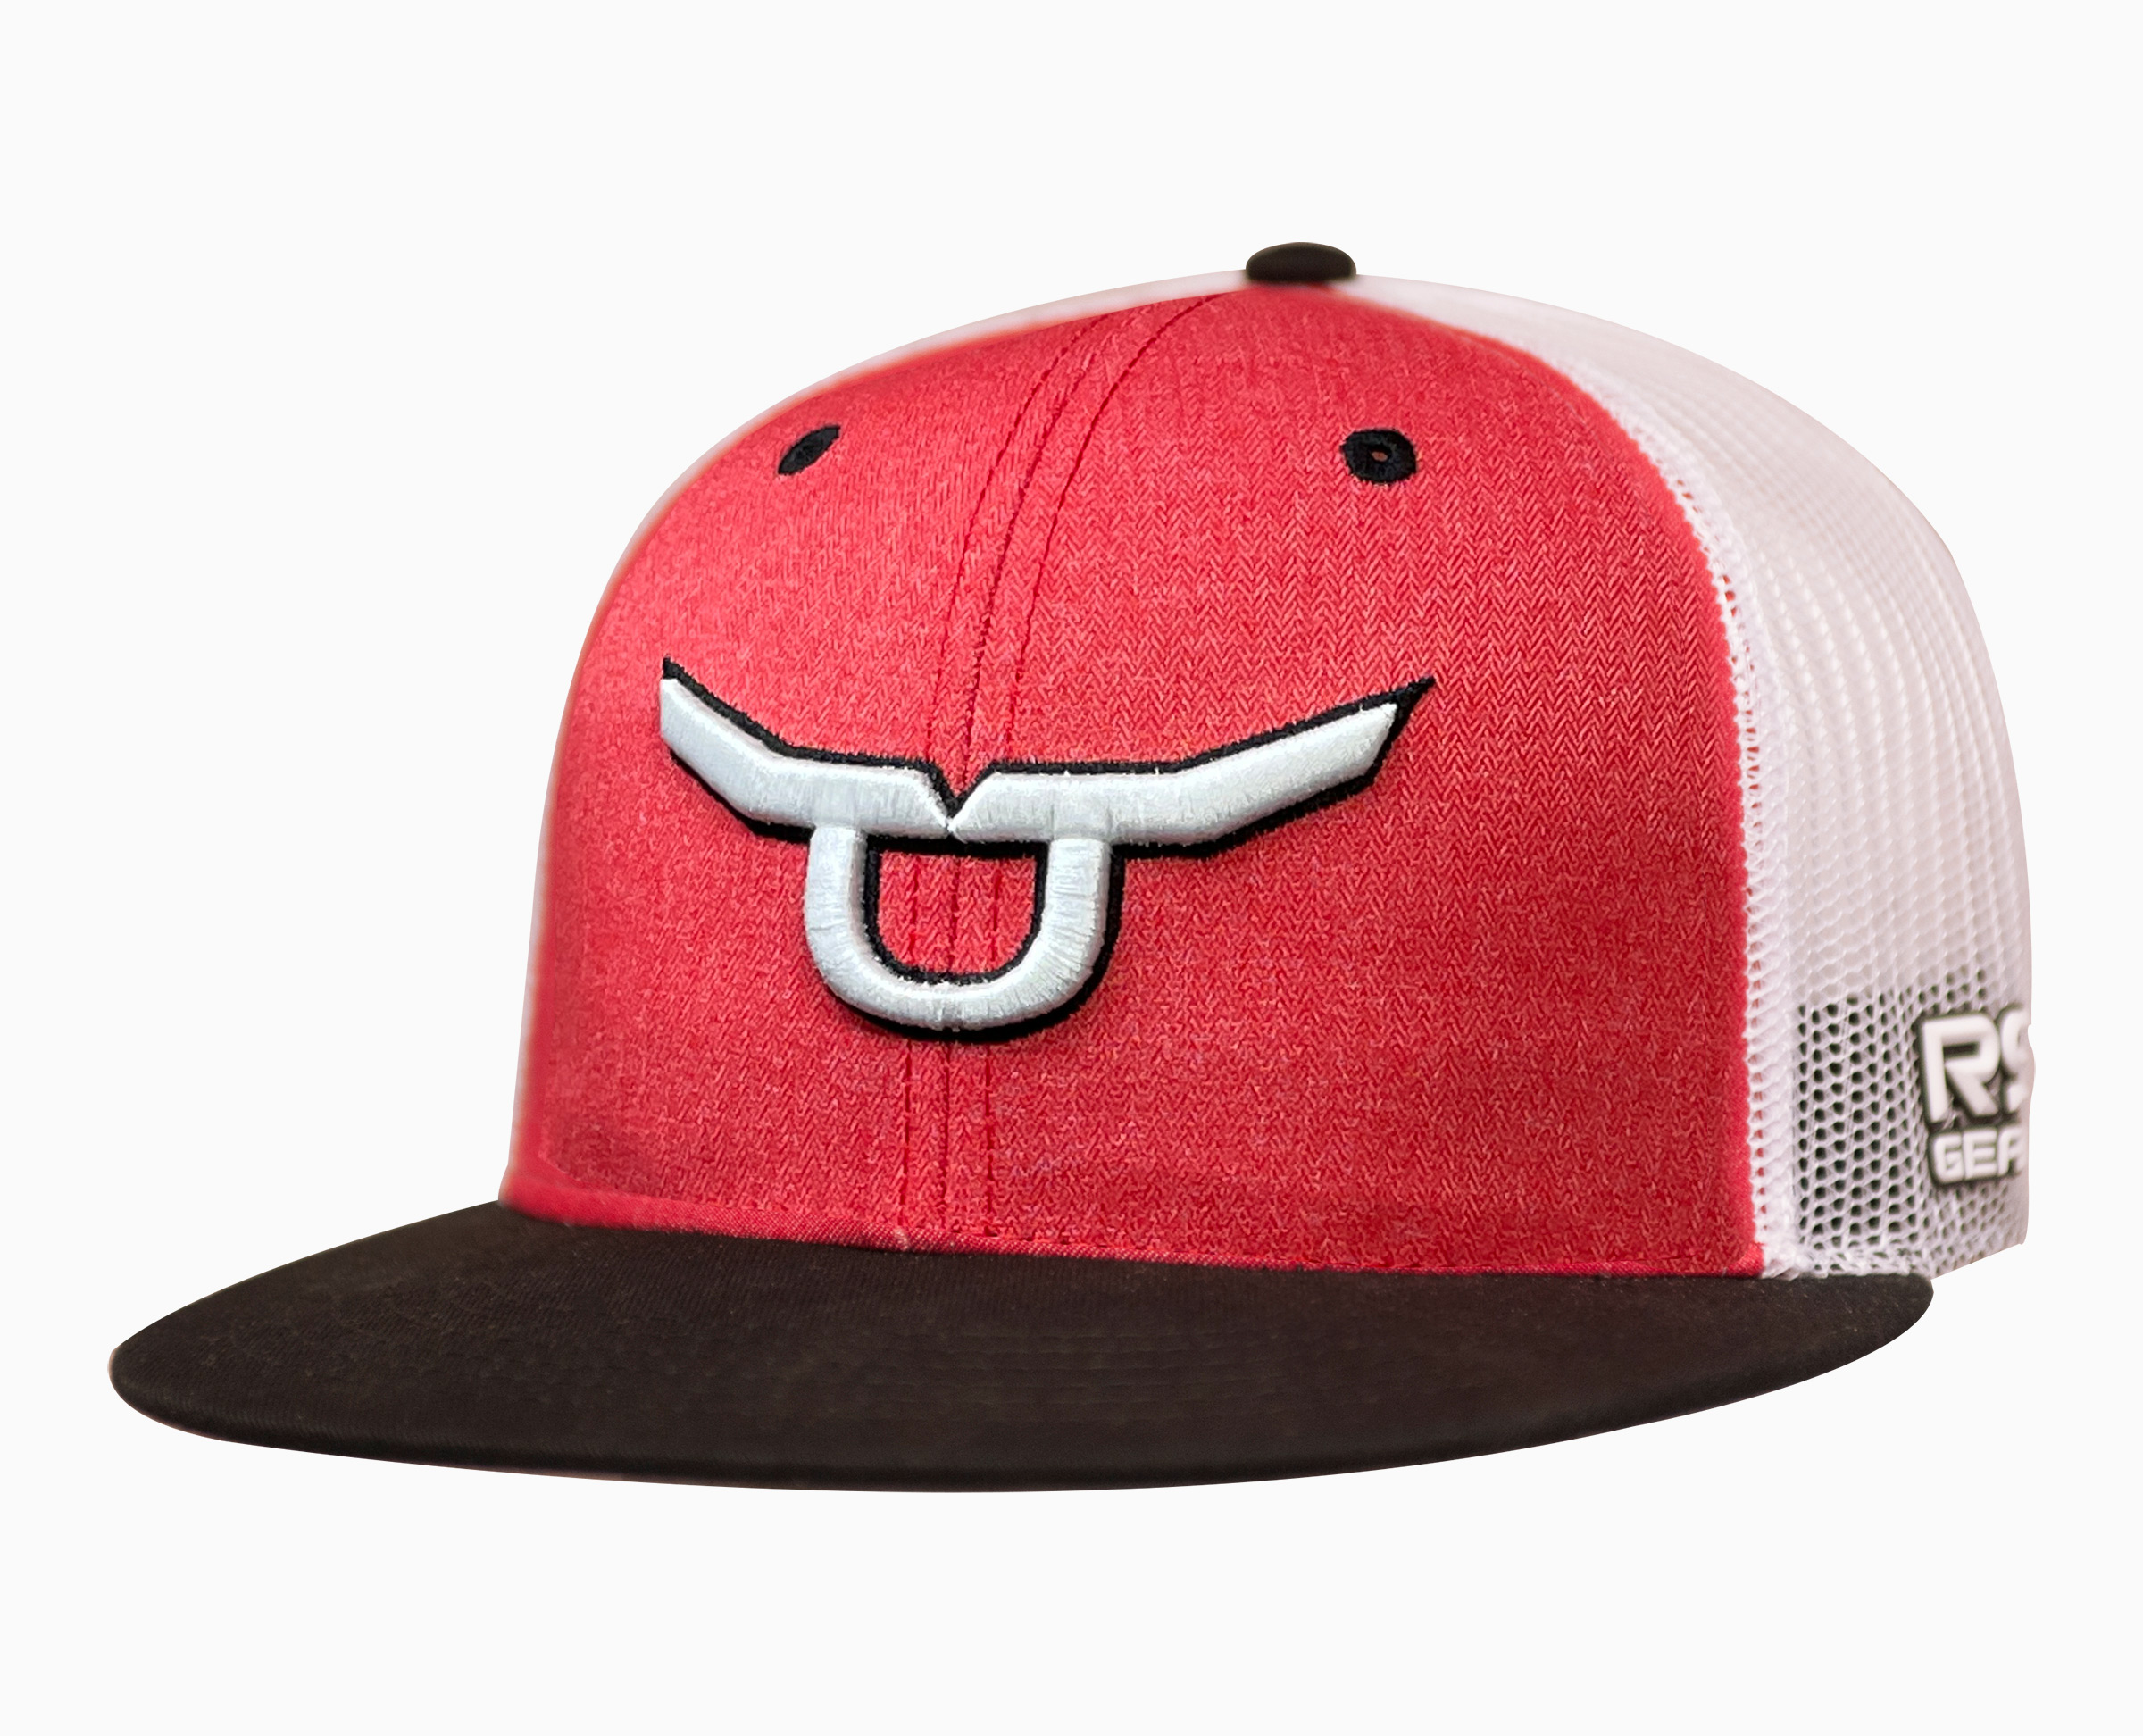 RopeSmart Classic Heather Red Snapback with White Embroidered Steer; Heather Red Crown, Black Bill w/ White Mesh